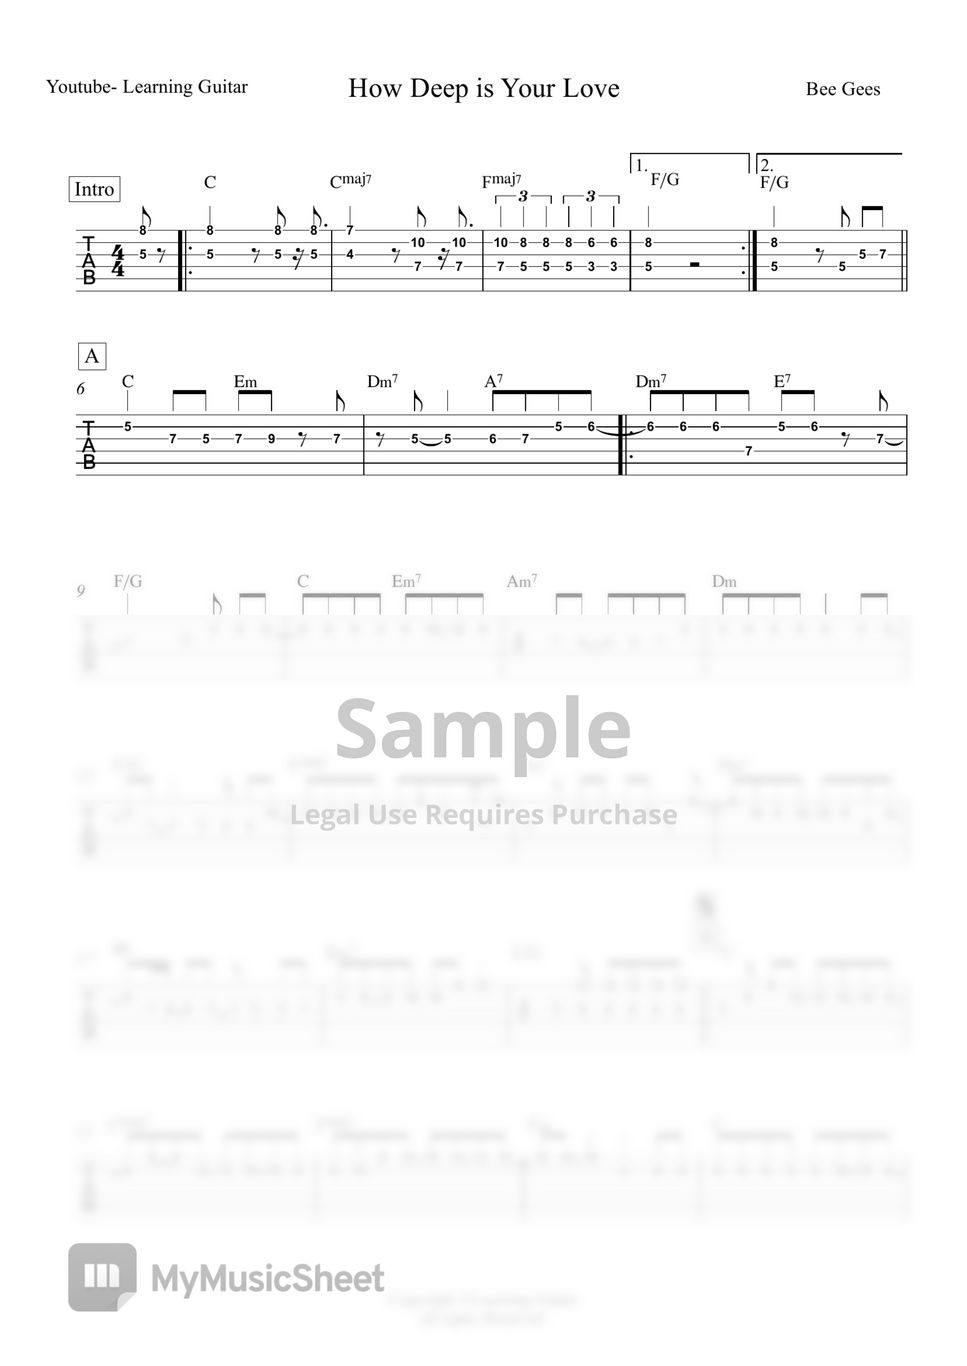 Bee Gees - How Deep Is Your Love -Melody TAB by Learning Guitar